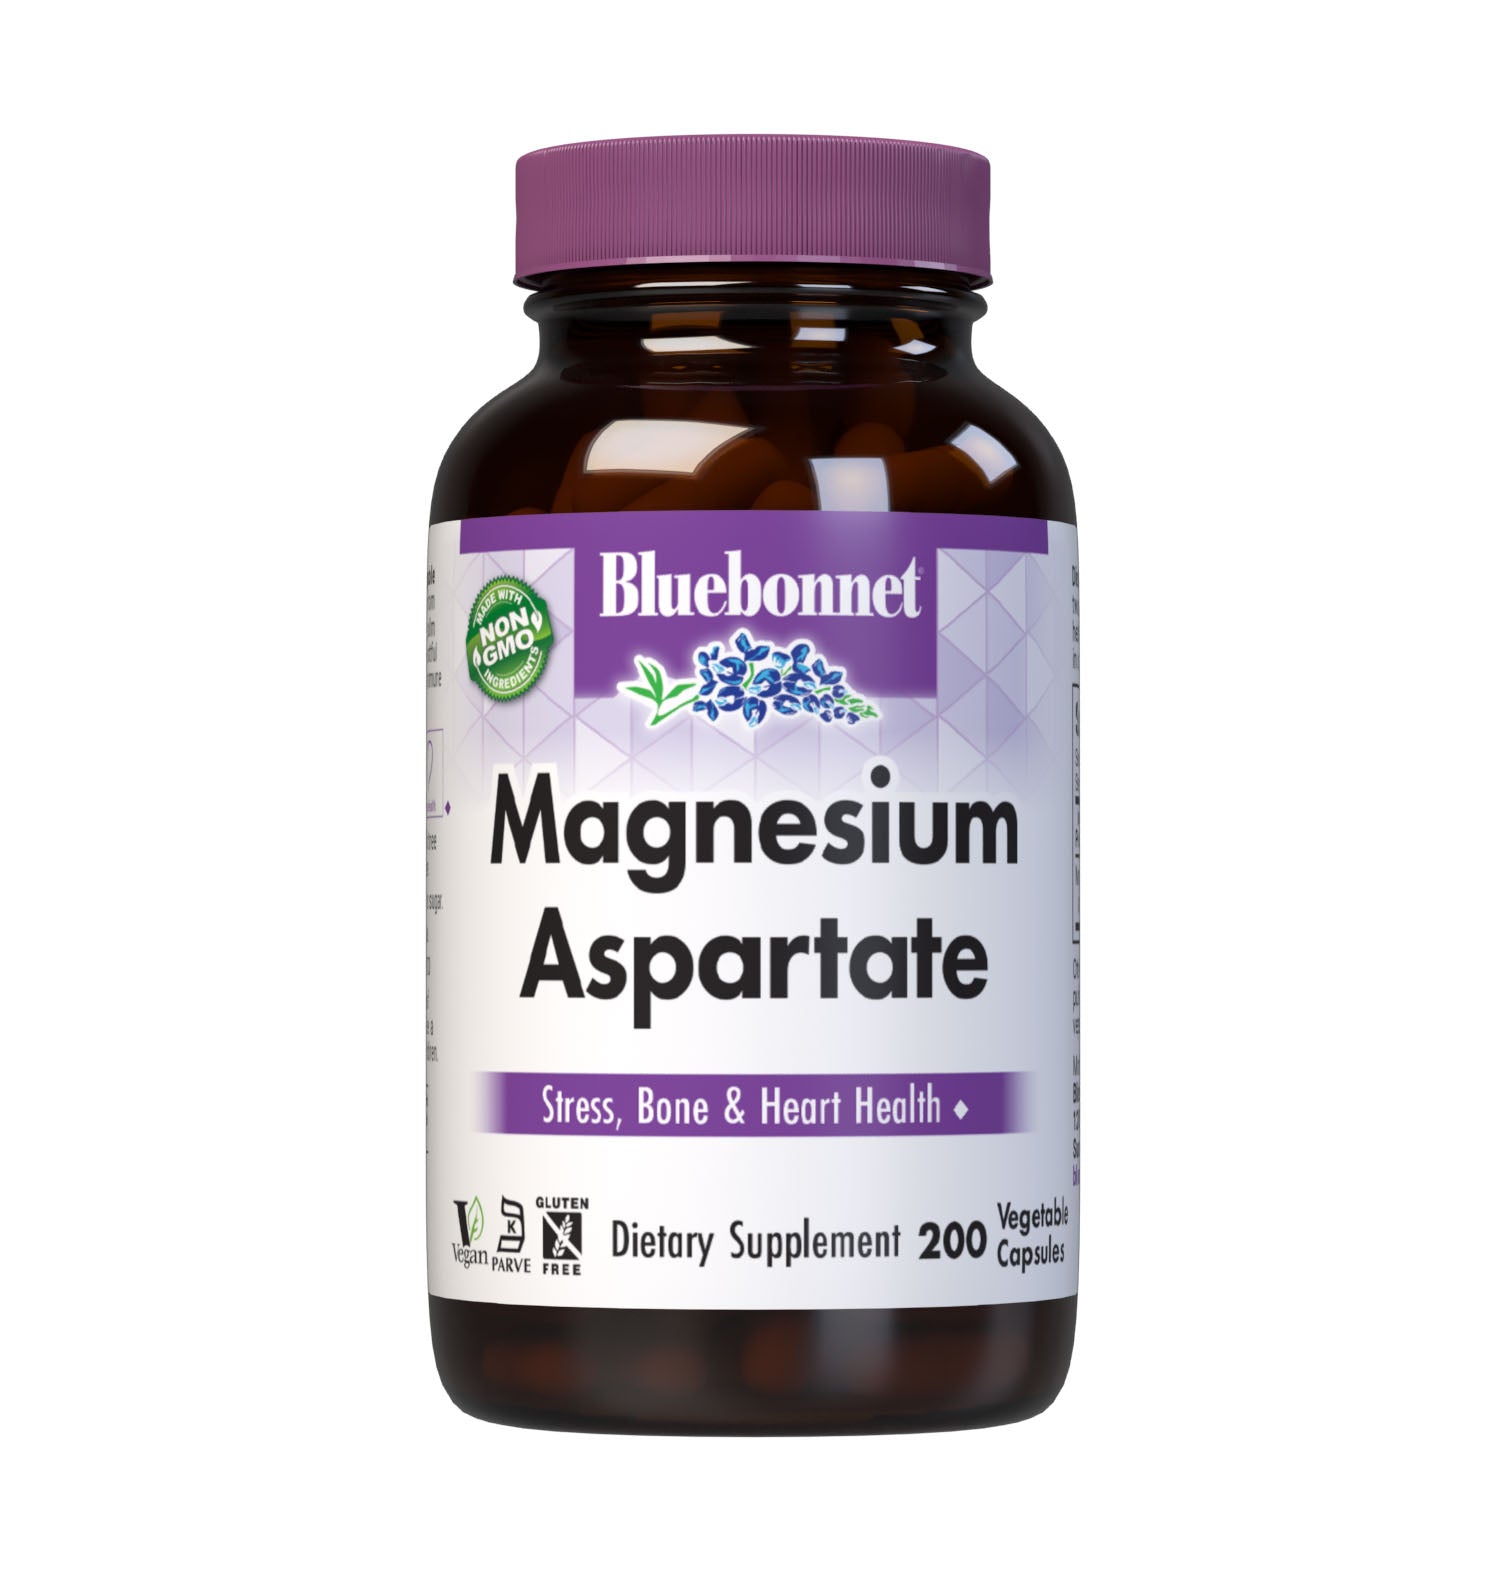 Bluebonnet's Magnesium Aspartate 200 Vegetable Capsules are formulated with magnesium from a chelate of magnesium aspartate. Magnesium is required in over 300 biochemical reactions in the body but is primarily known to calm the mind and body, reduce stress, induce restful sleep, increase bone density, as well as support immune and cardiovascular health. #size_200 count